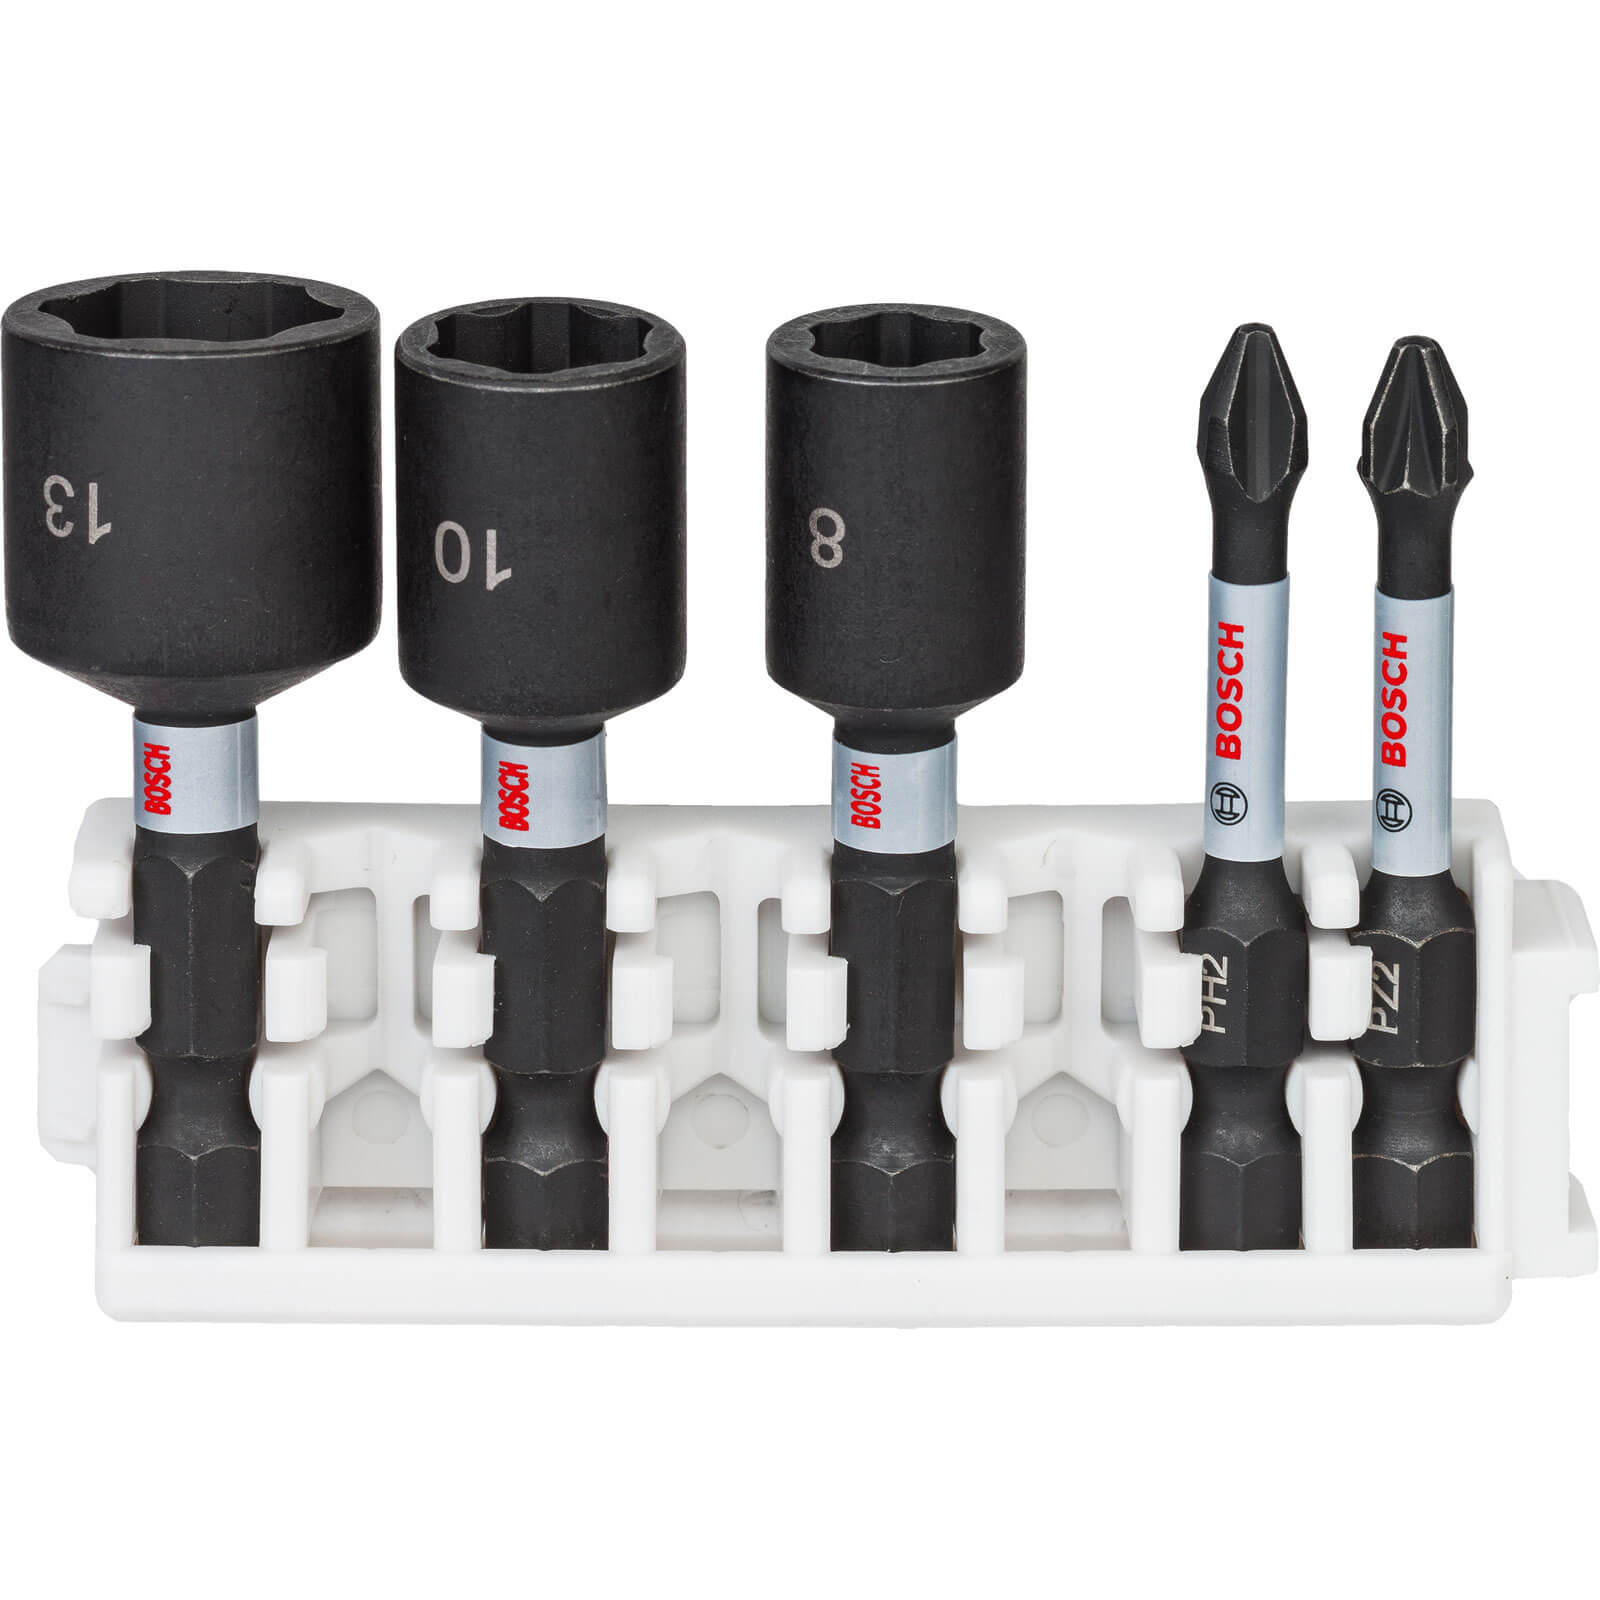 Image of Bosch Impact Control Nutsetter and Impact Power Bit Set